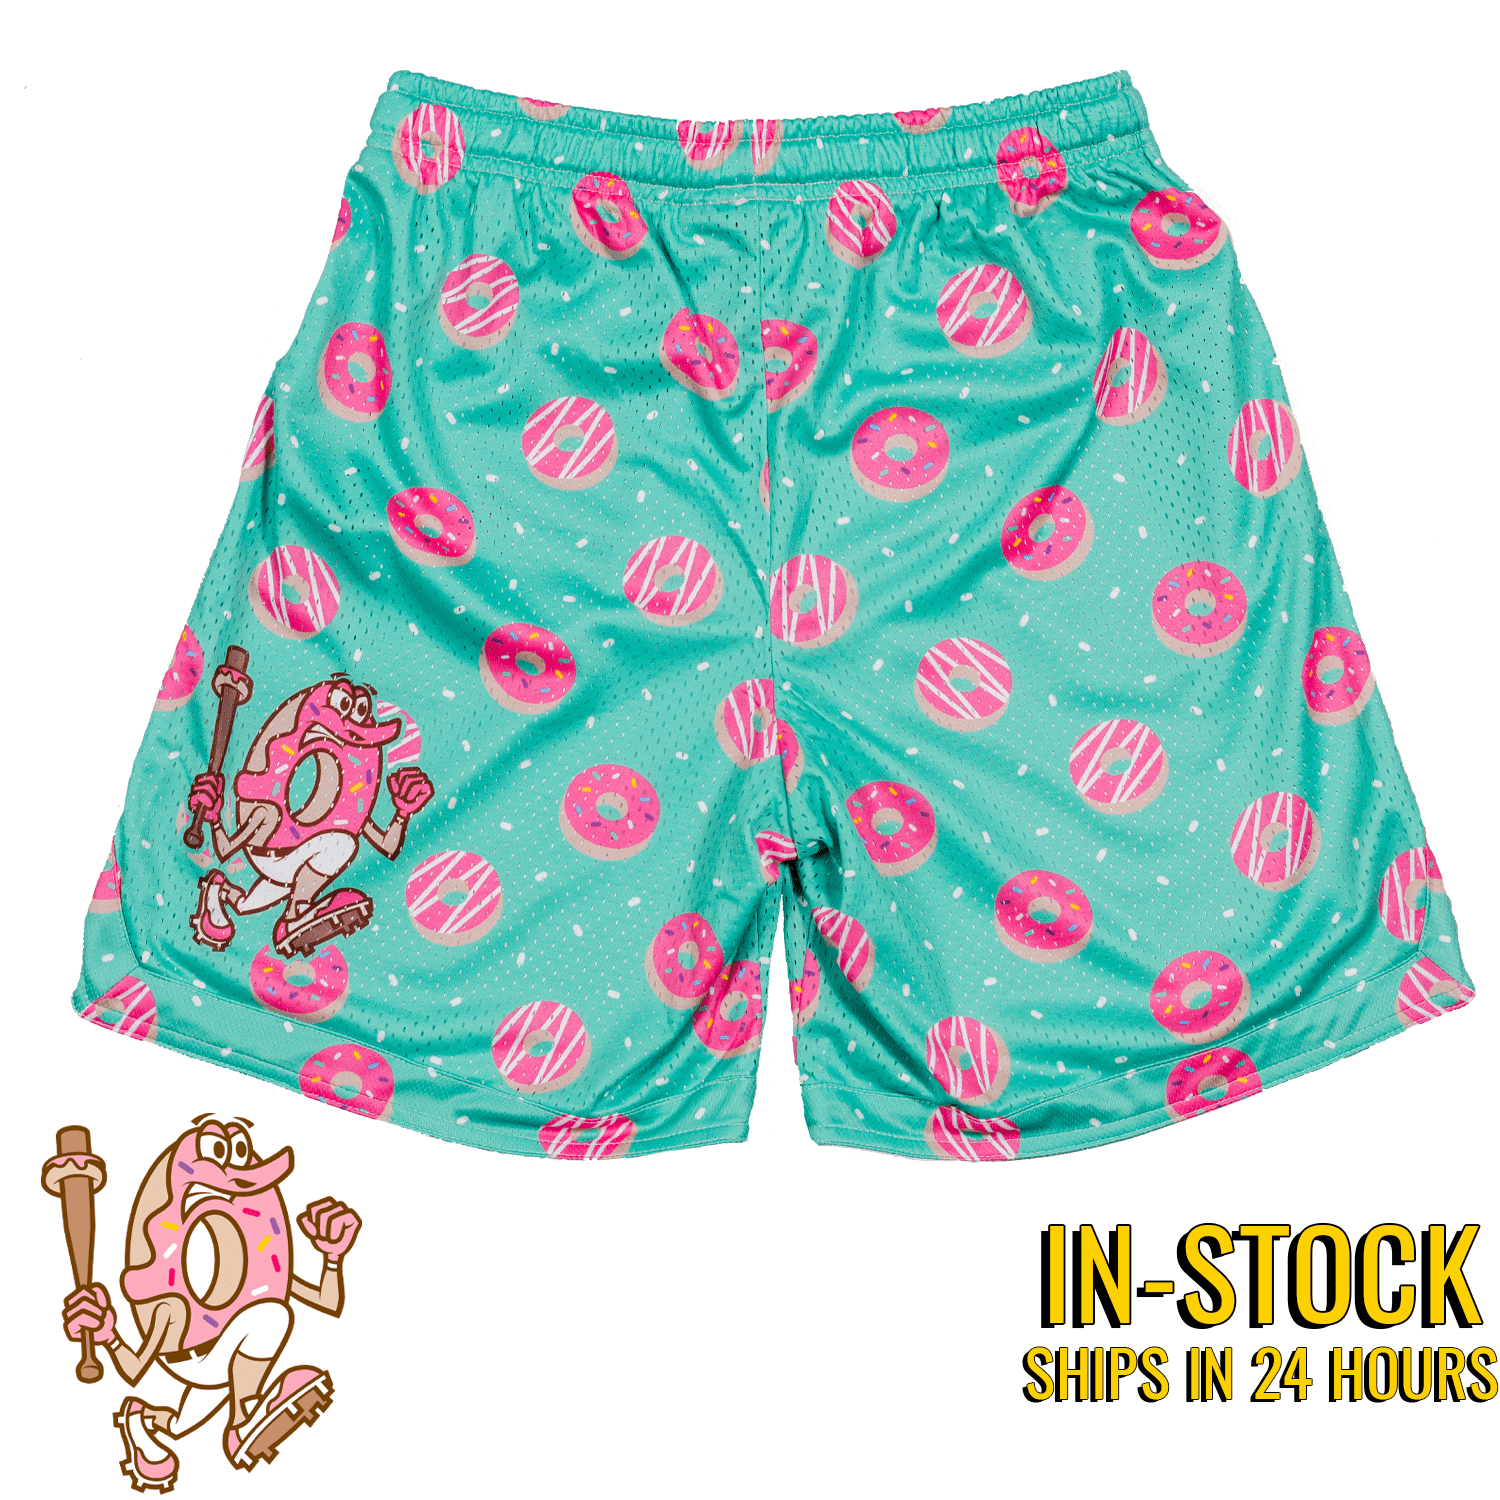 Dingers and Doughnuts Retro Mesh Shorts *IN-STOCK*